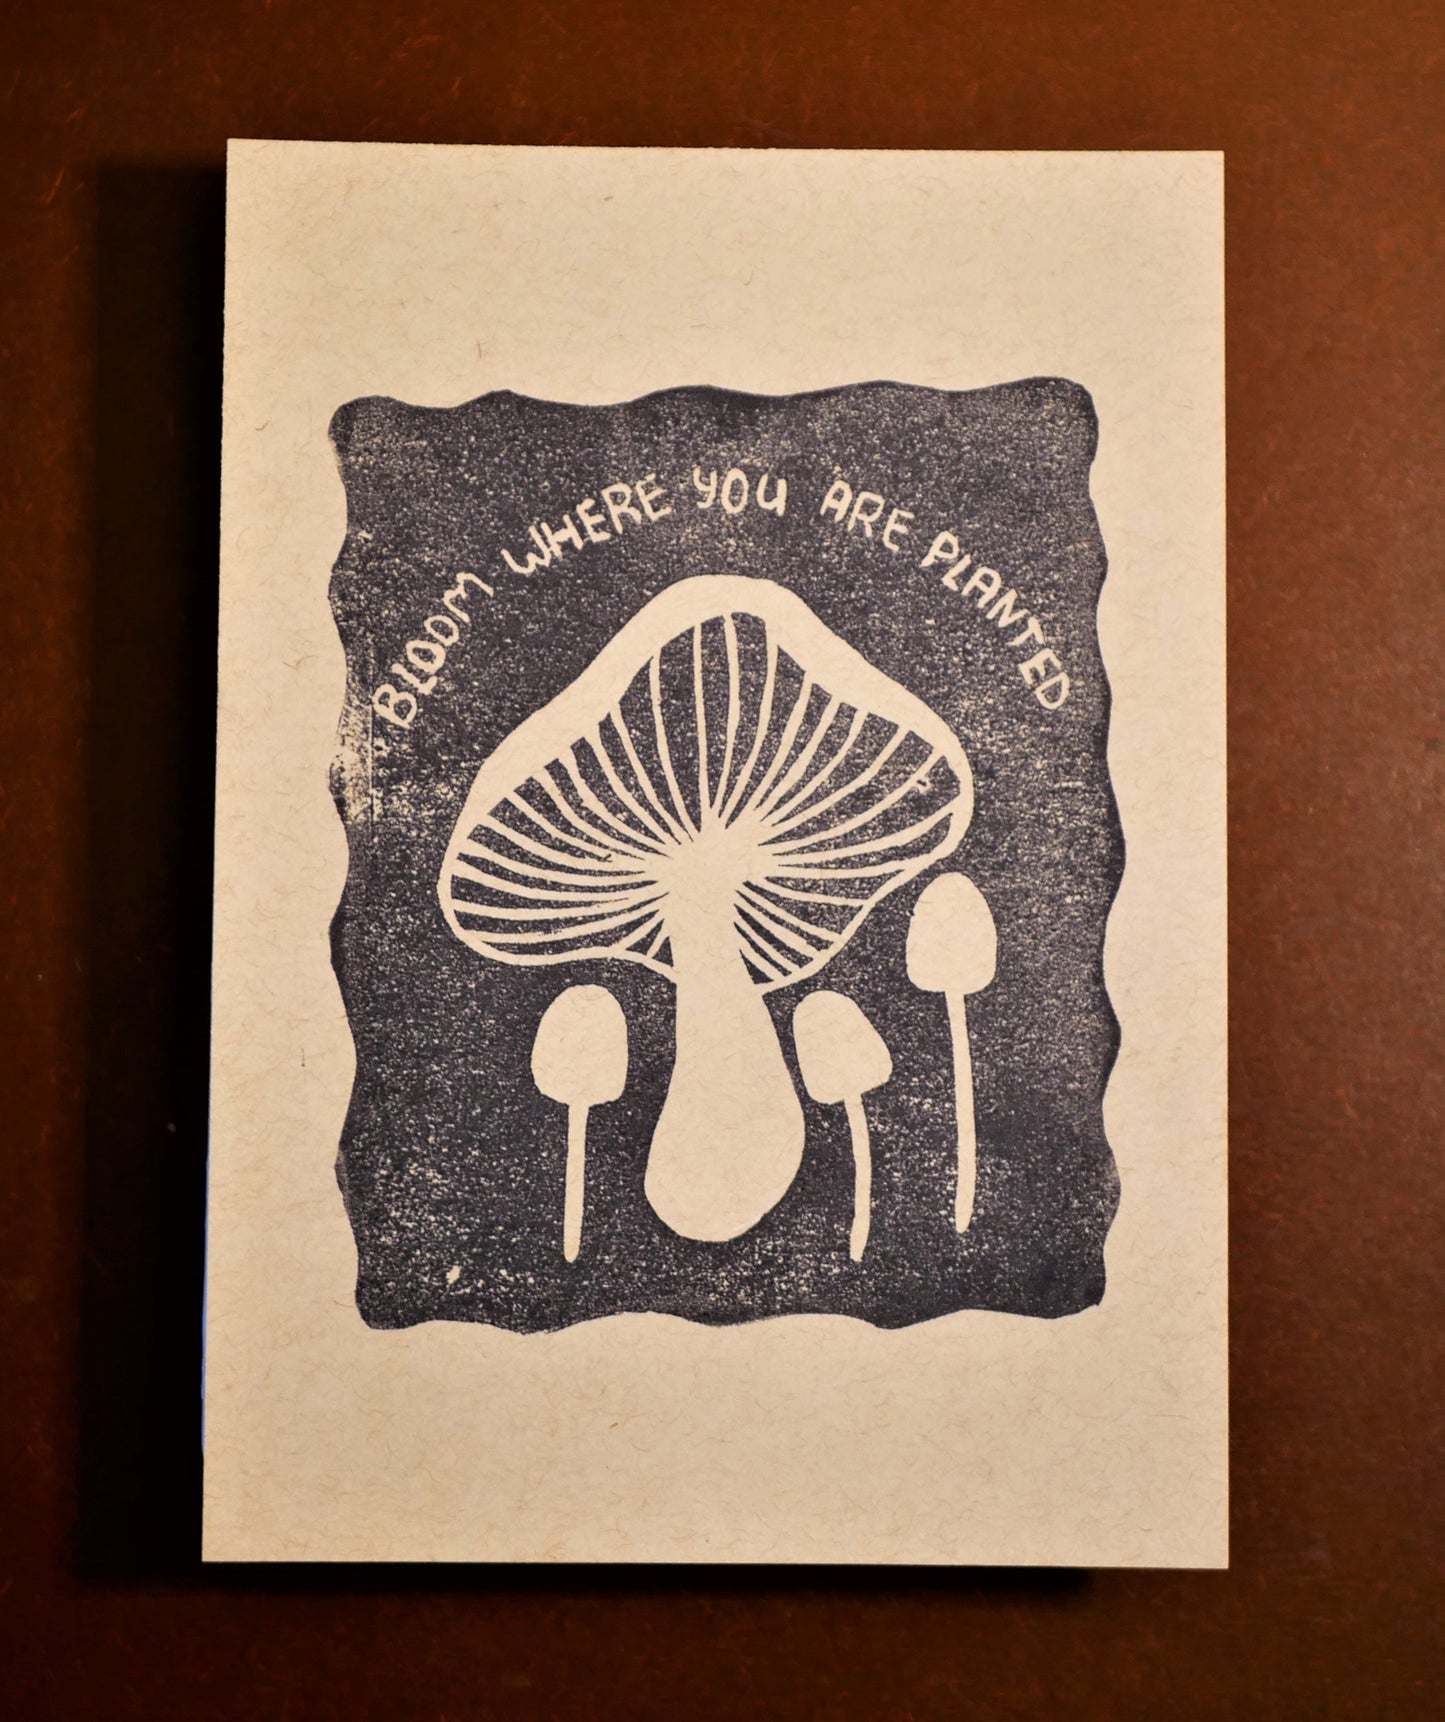 "Bloom Where You Are Planted" 5x7" Block Print